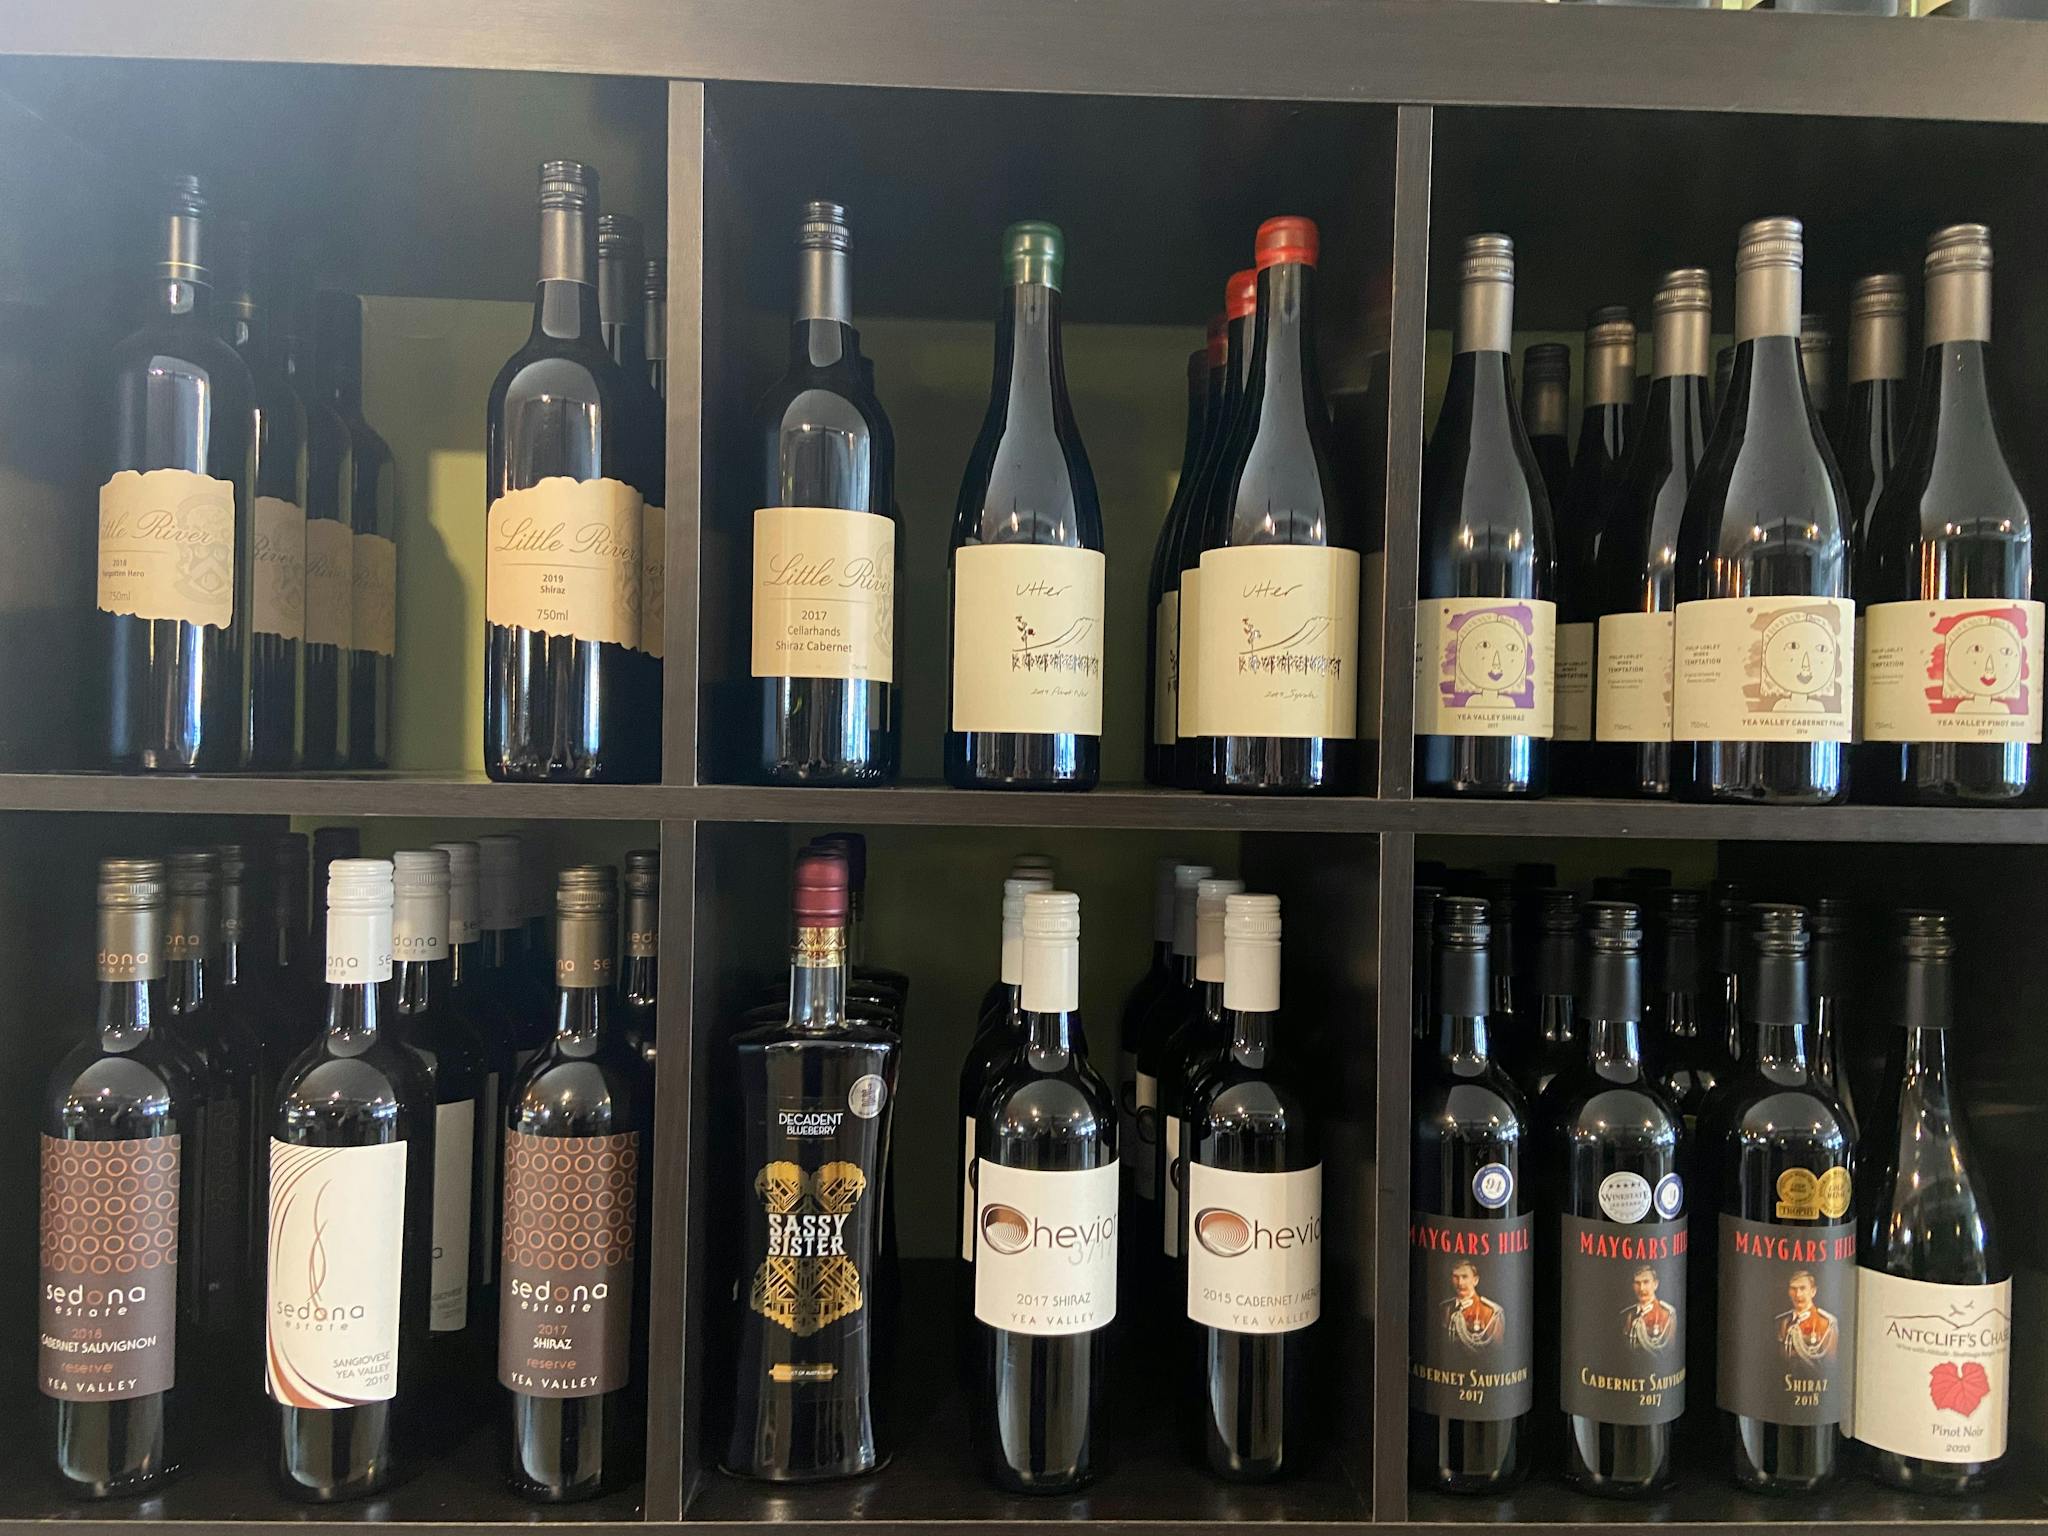 Great selection of local wines in our produce store